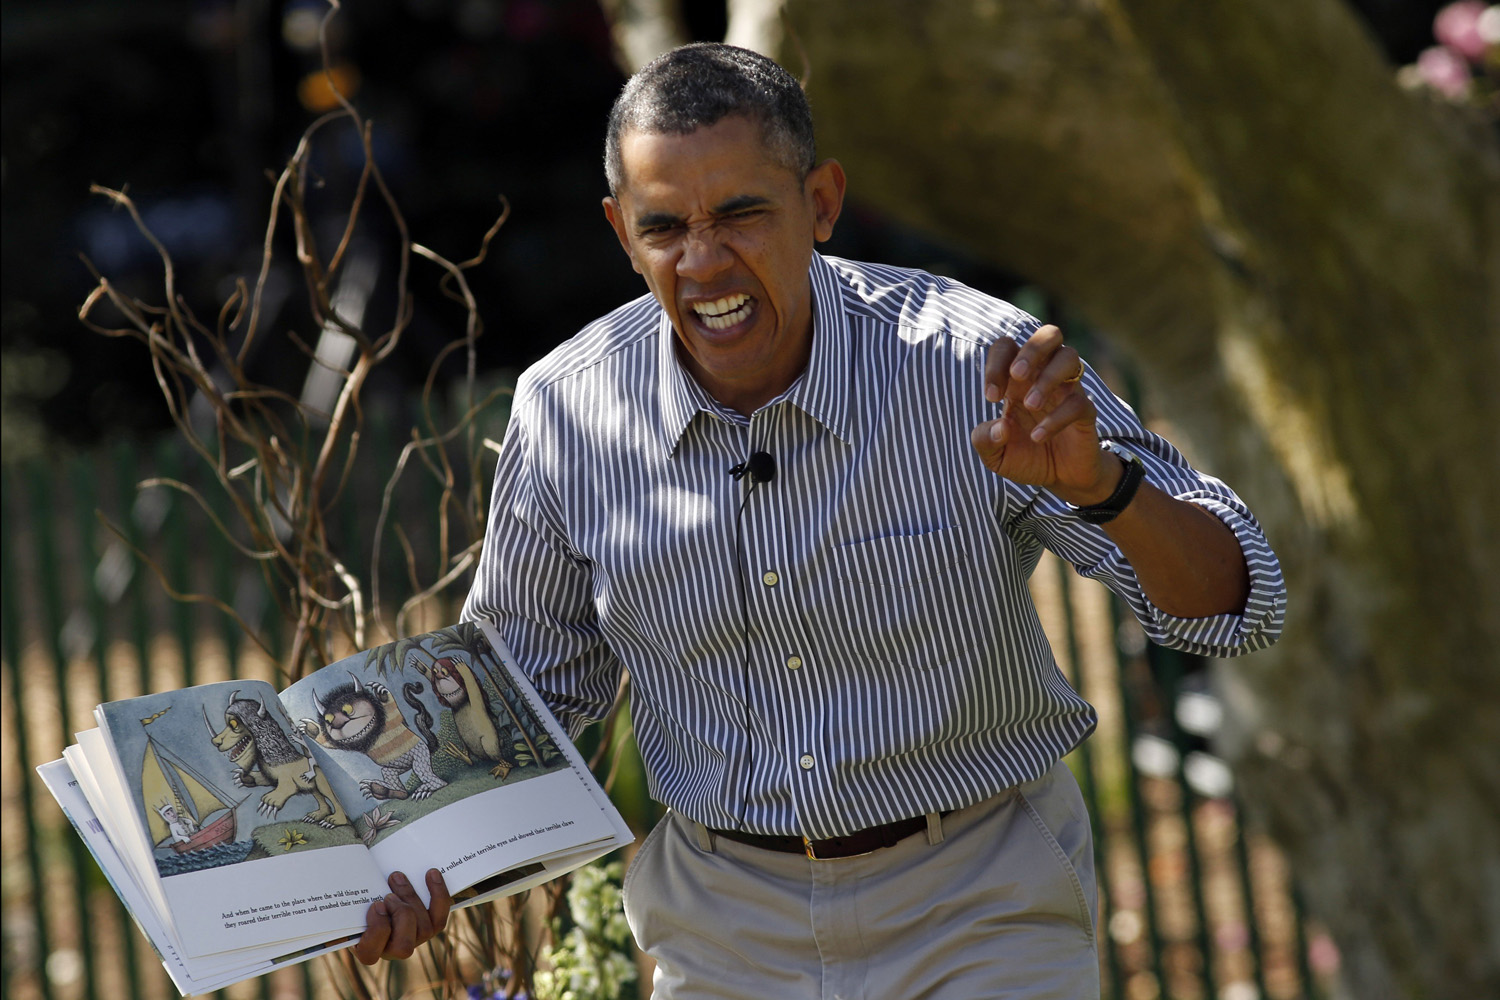 Apr. 21, 2014. U.S. President Barack Obama acts out the line  gnashed their terrible teeth  from the children's book  Where the Wild Things Are  during the 136th annual Easter Egg Roll on the South Lawn of the White House in Washington.